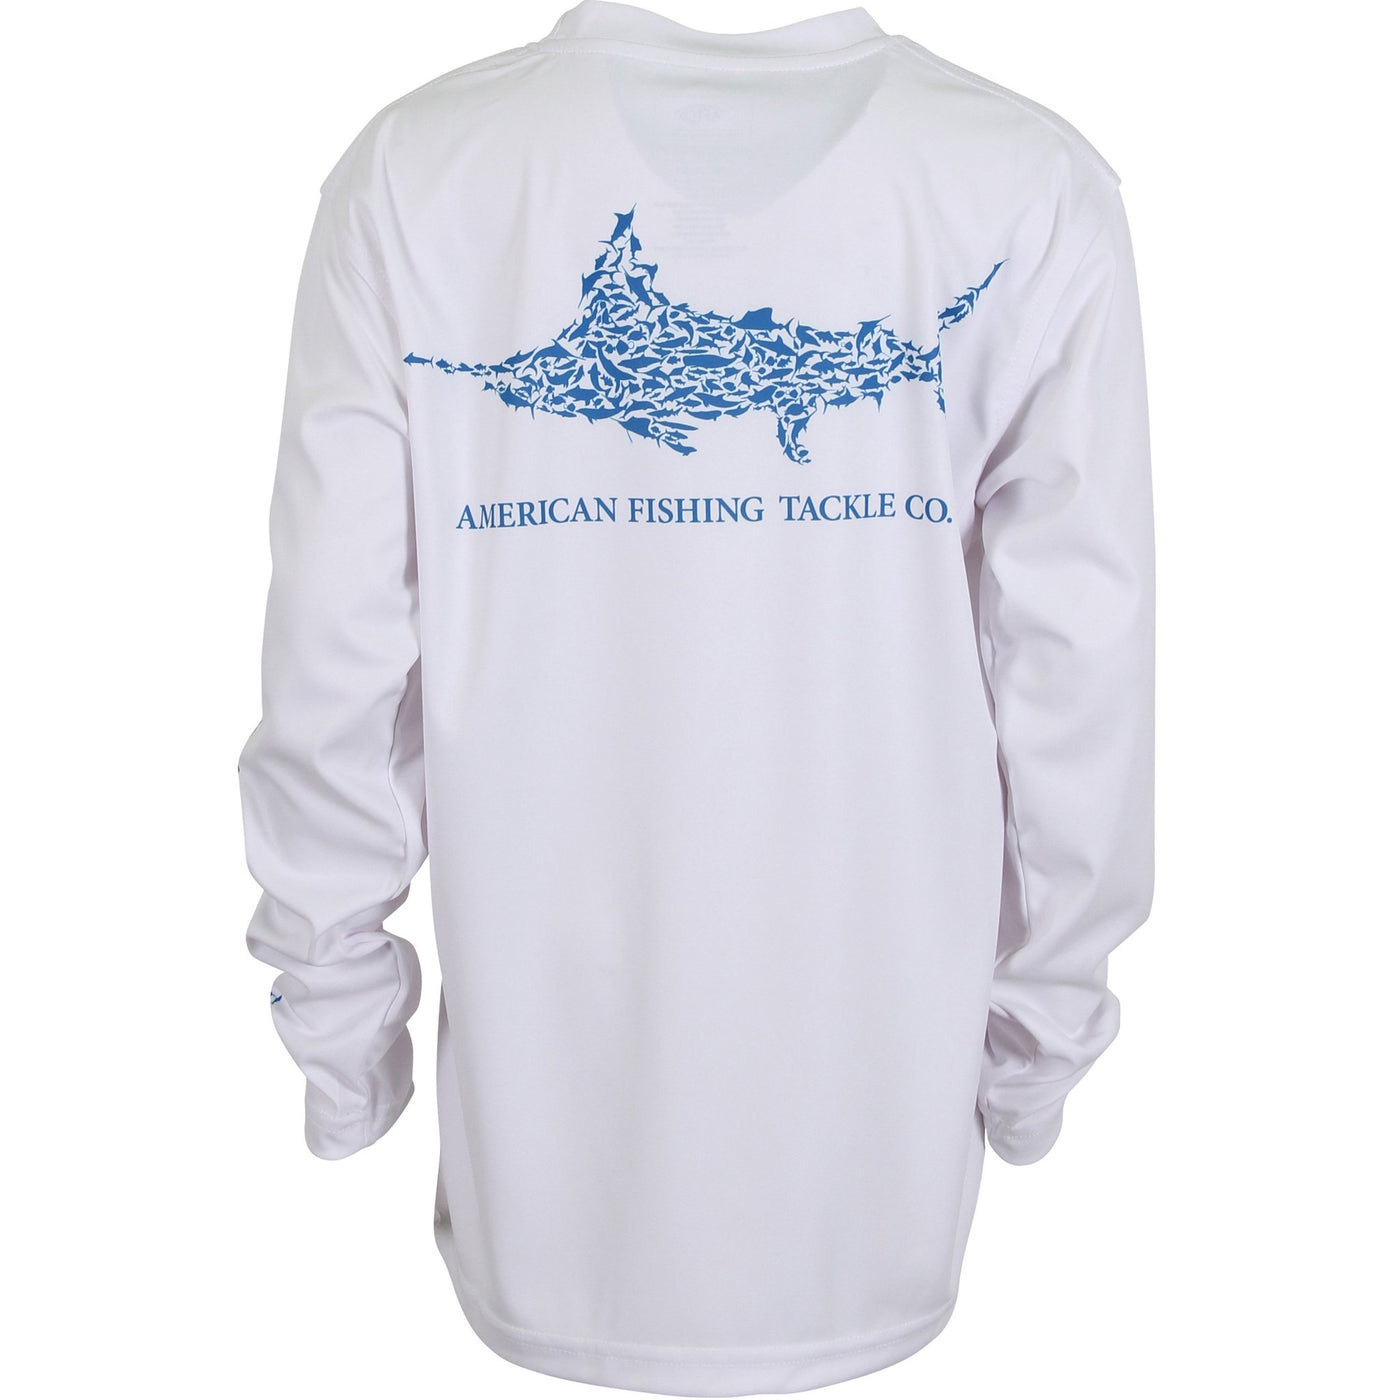 AFTCO Youth Jigfish Long Sleeve Shirt-CHILDRENS CLOTHING-White-S-Kevin's Fine Outdoor Gear & Apparel